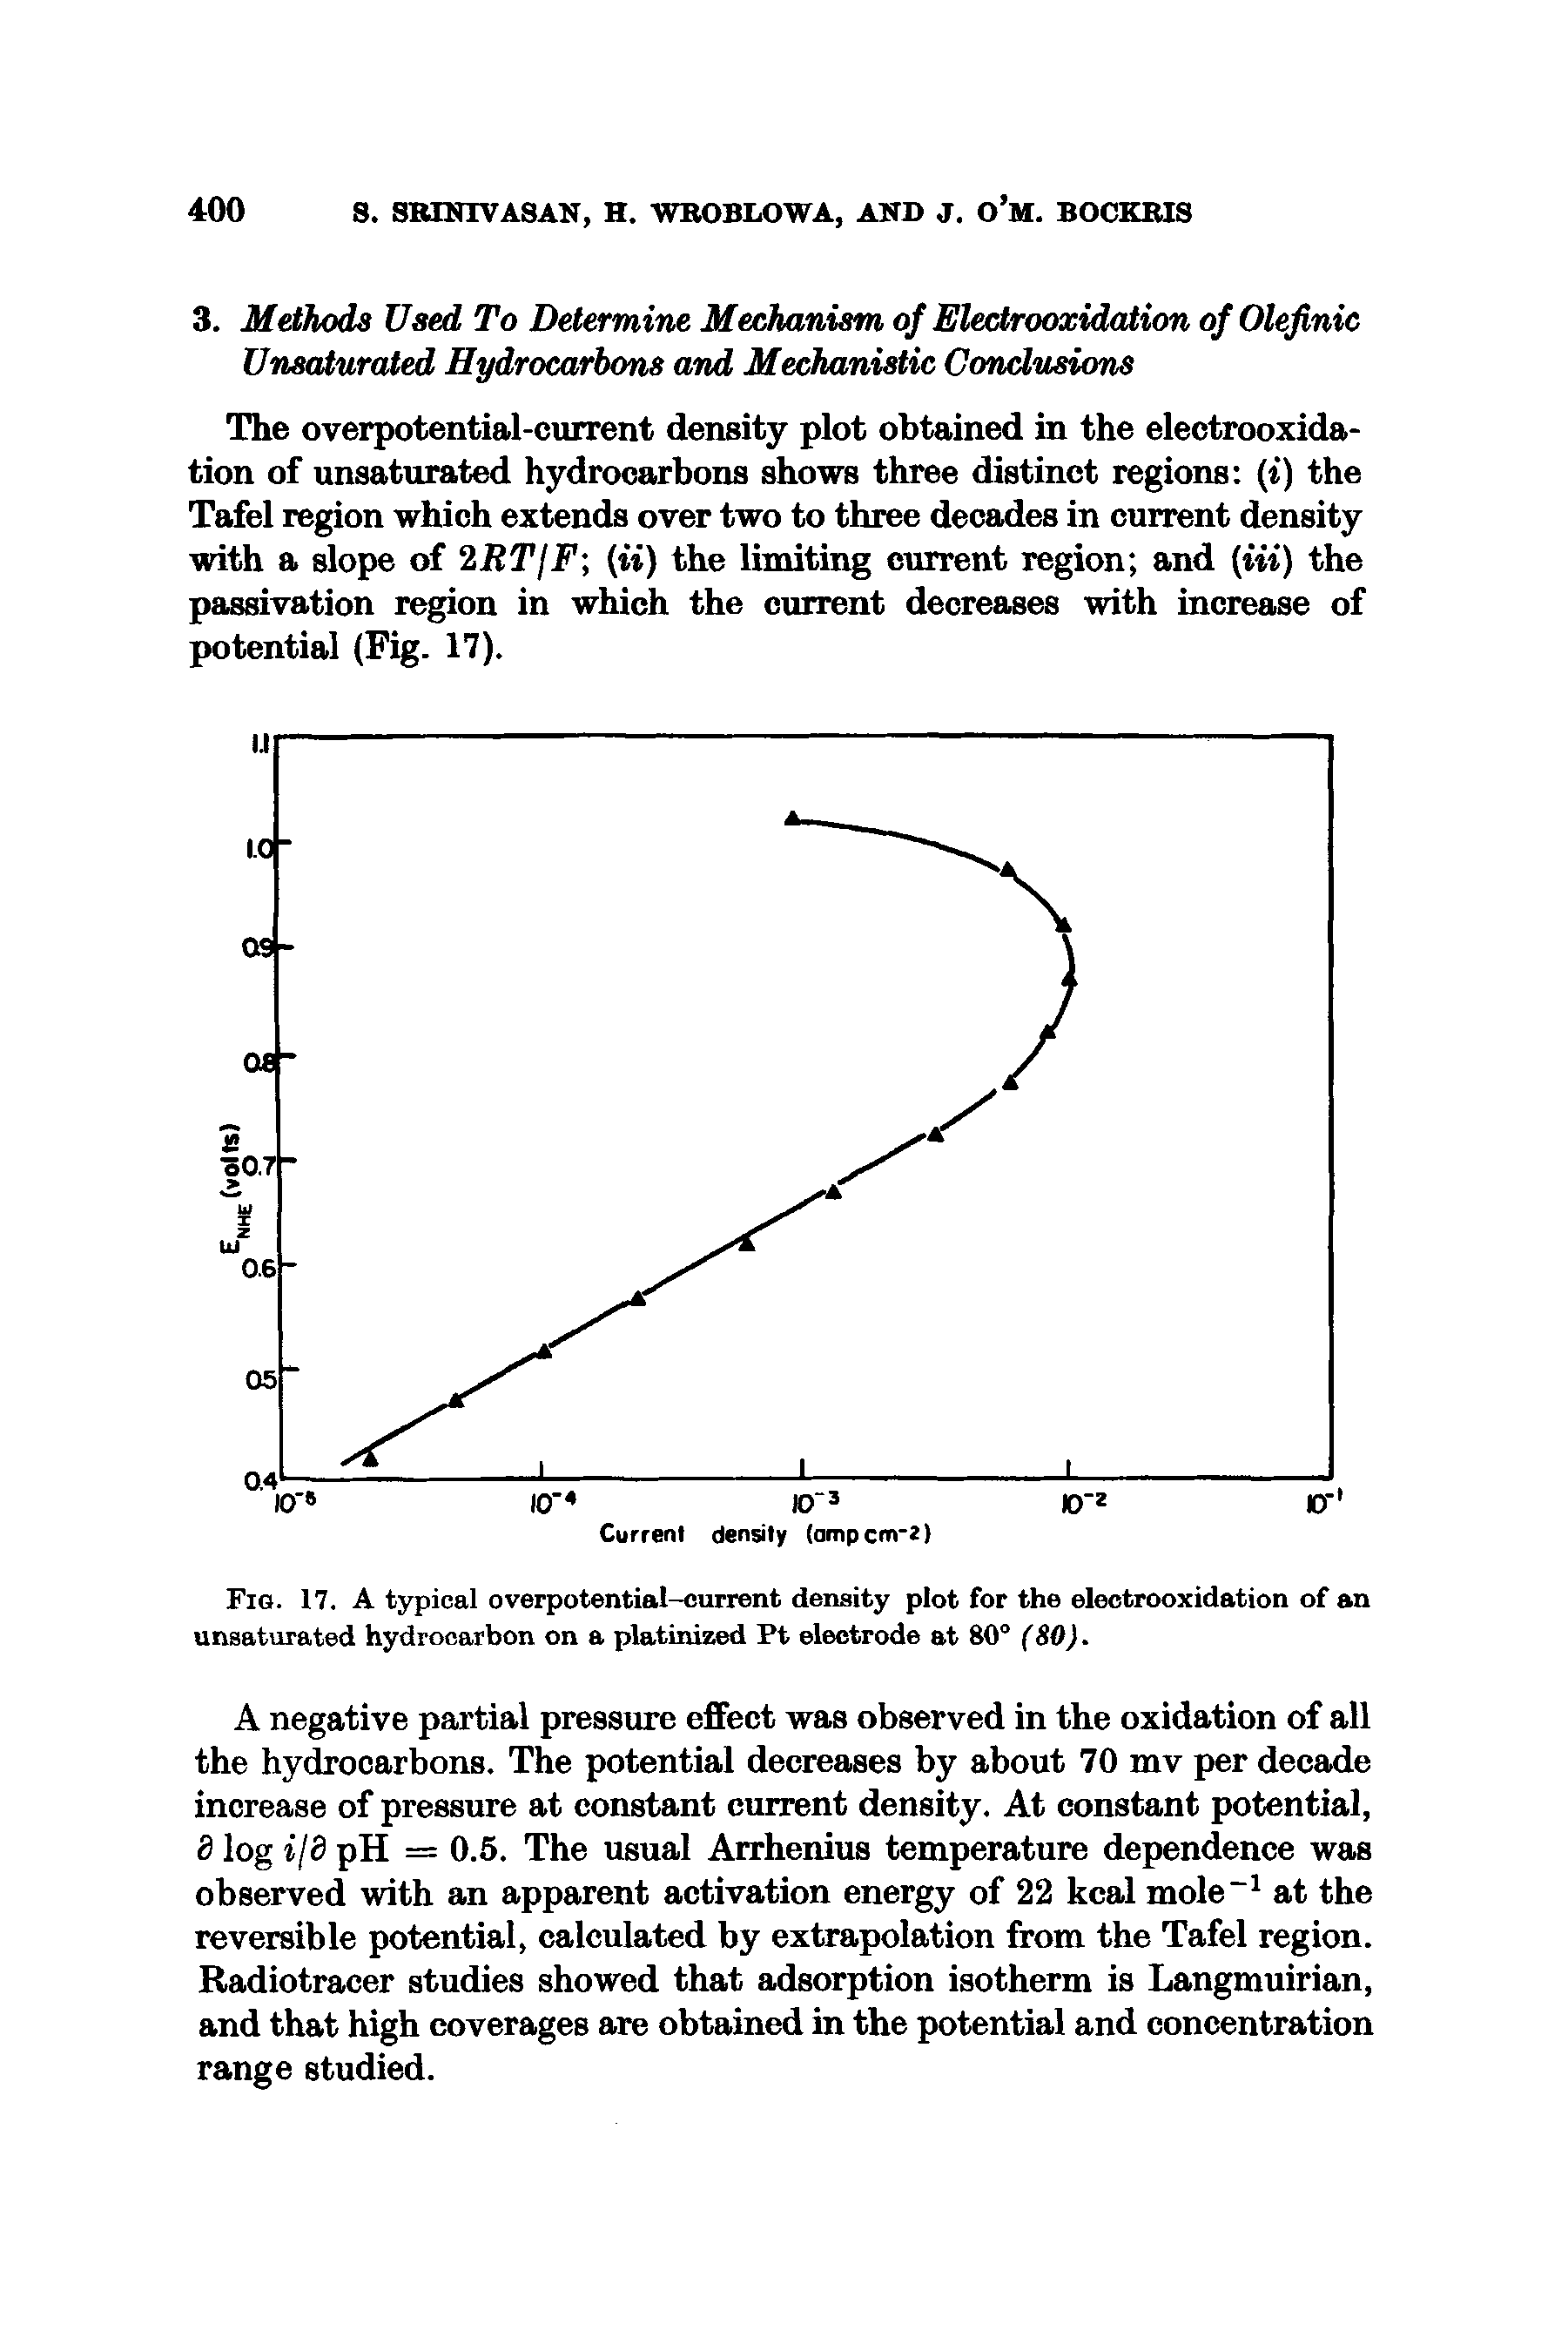 Fig. 17. A typical overpotential-current density plot for the electrooxidation of an unsaturated hydrocarbon on a platinized Pt electrode at 80 (80).